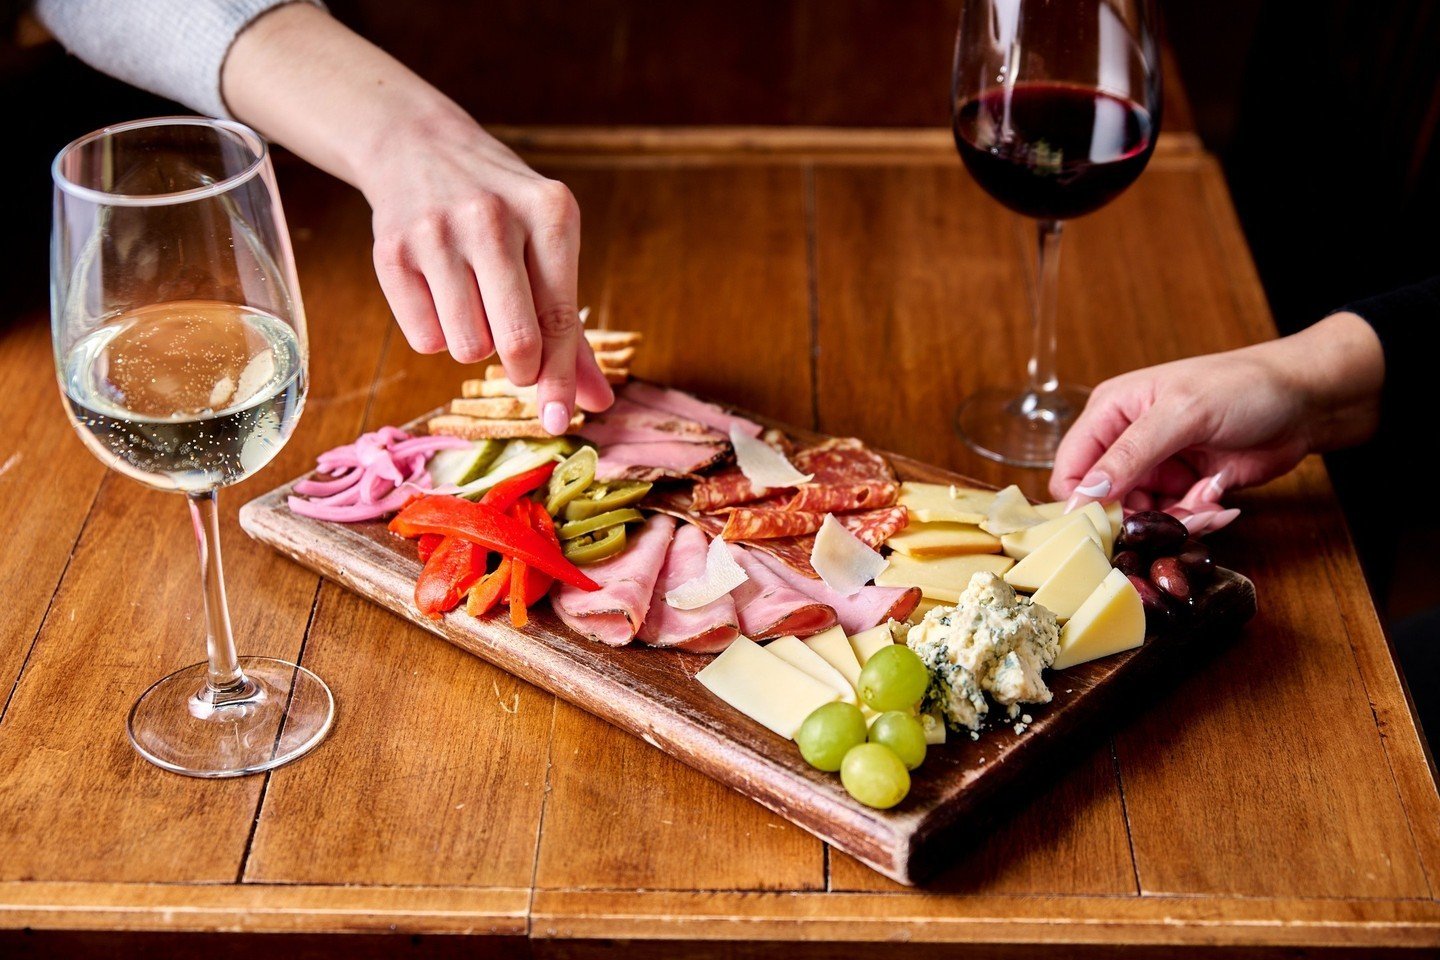 Make this weekend extra special for mom with a mouthwatering spread of our delicious, cured meats and cheese. Reservations will be closing tomorrow, so don't wait any longer to book your table! #ArlingtonHotel 💕💐⁠
.⁠
.⁠
.⁠
#treatmom #mom #mothersda